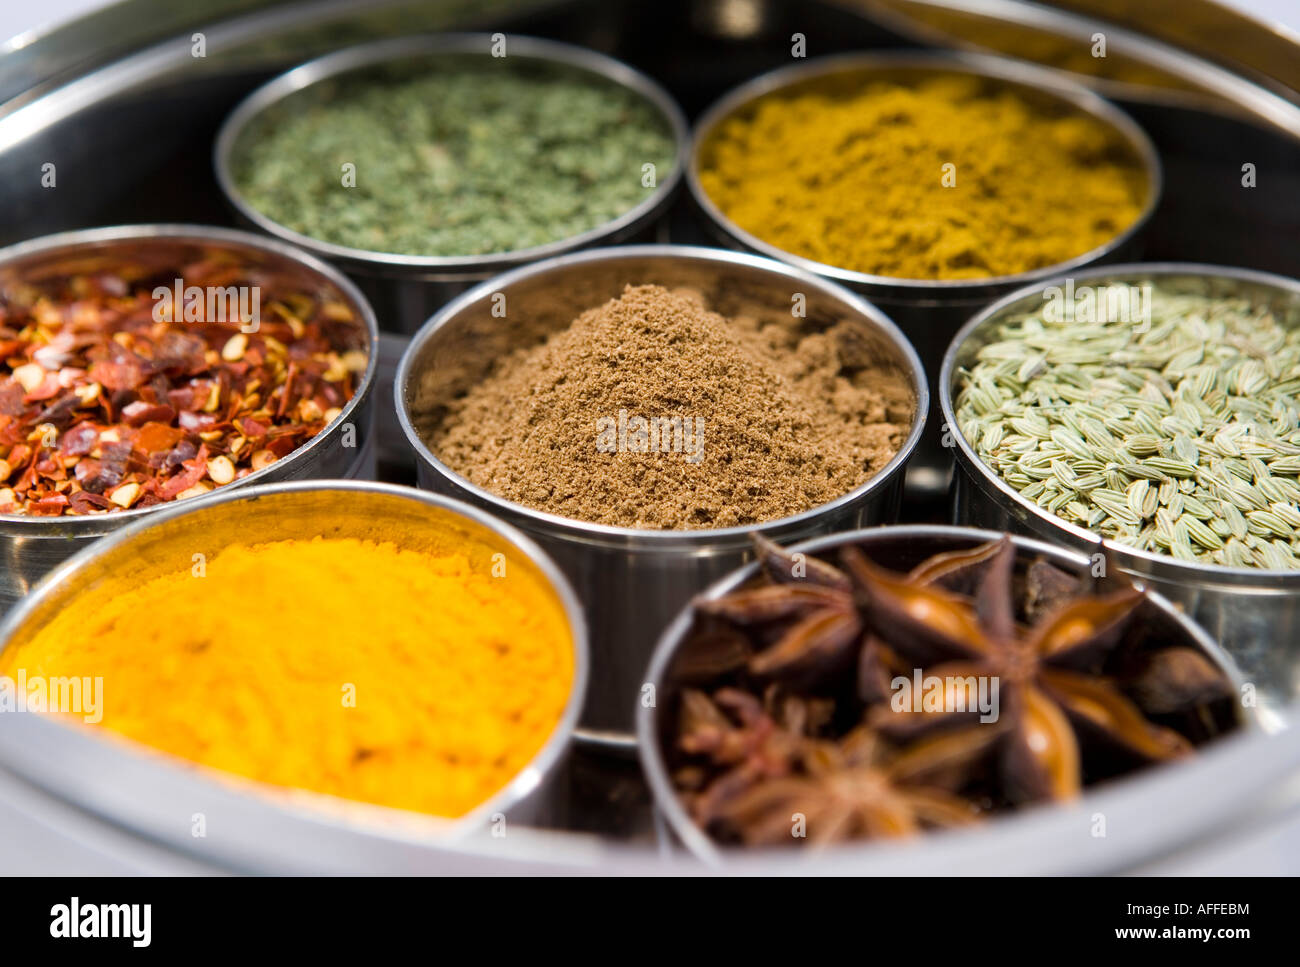 Mixed spices in containers Stock Photo